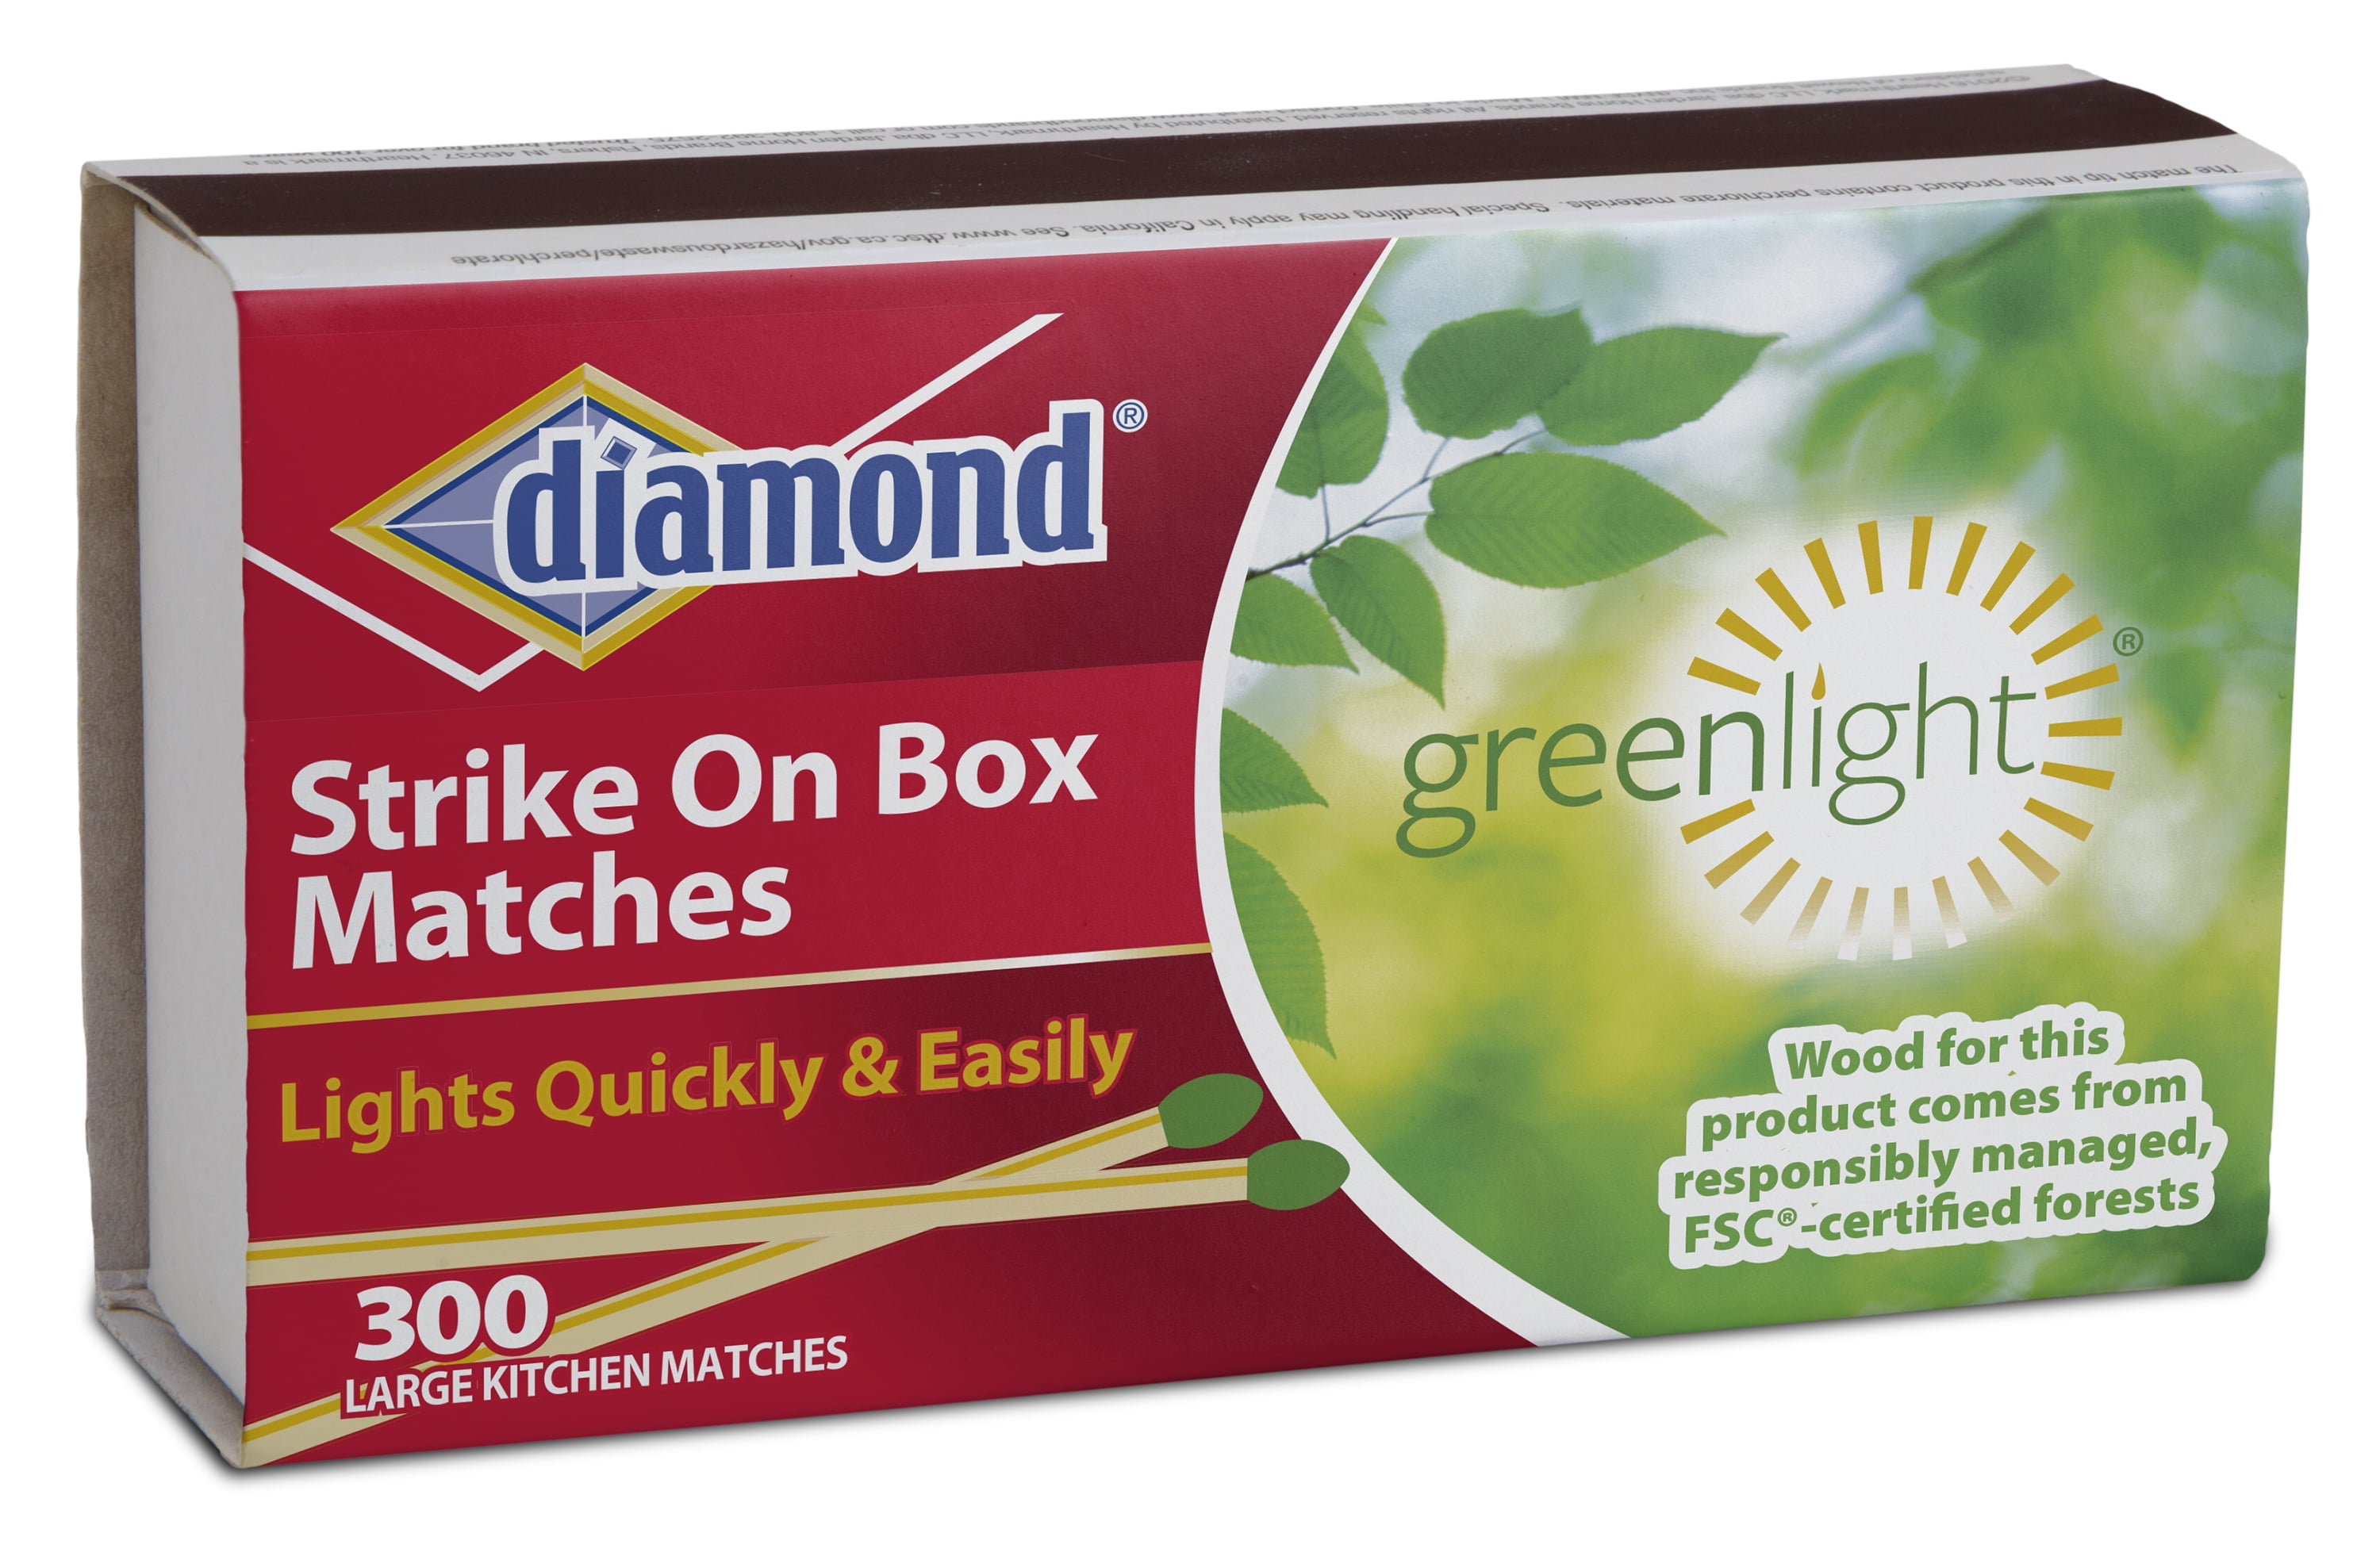 3 BOXES! Details about   300 ct DIAMOND STRIKE ON BOX WOODEN LARGE KITCHEN MATCHES GREENLIGHT 